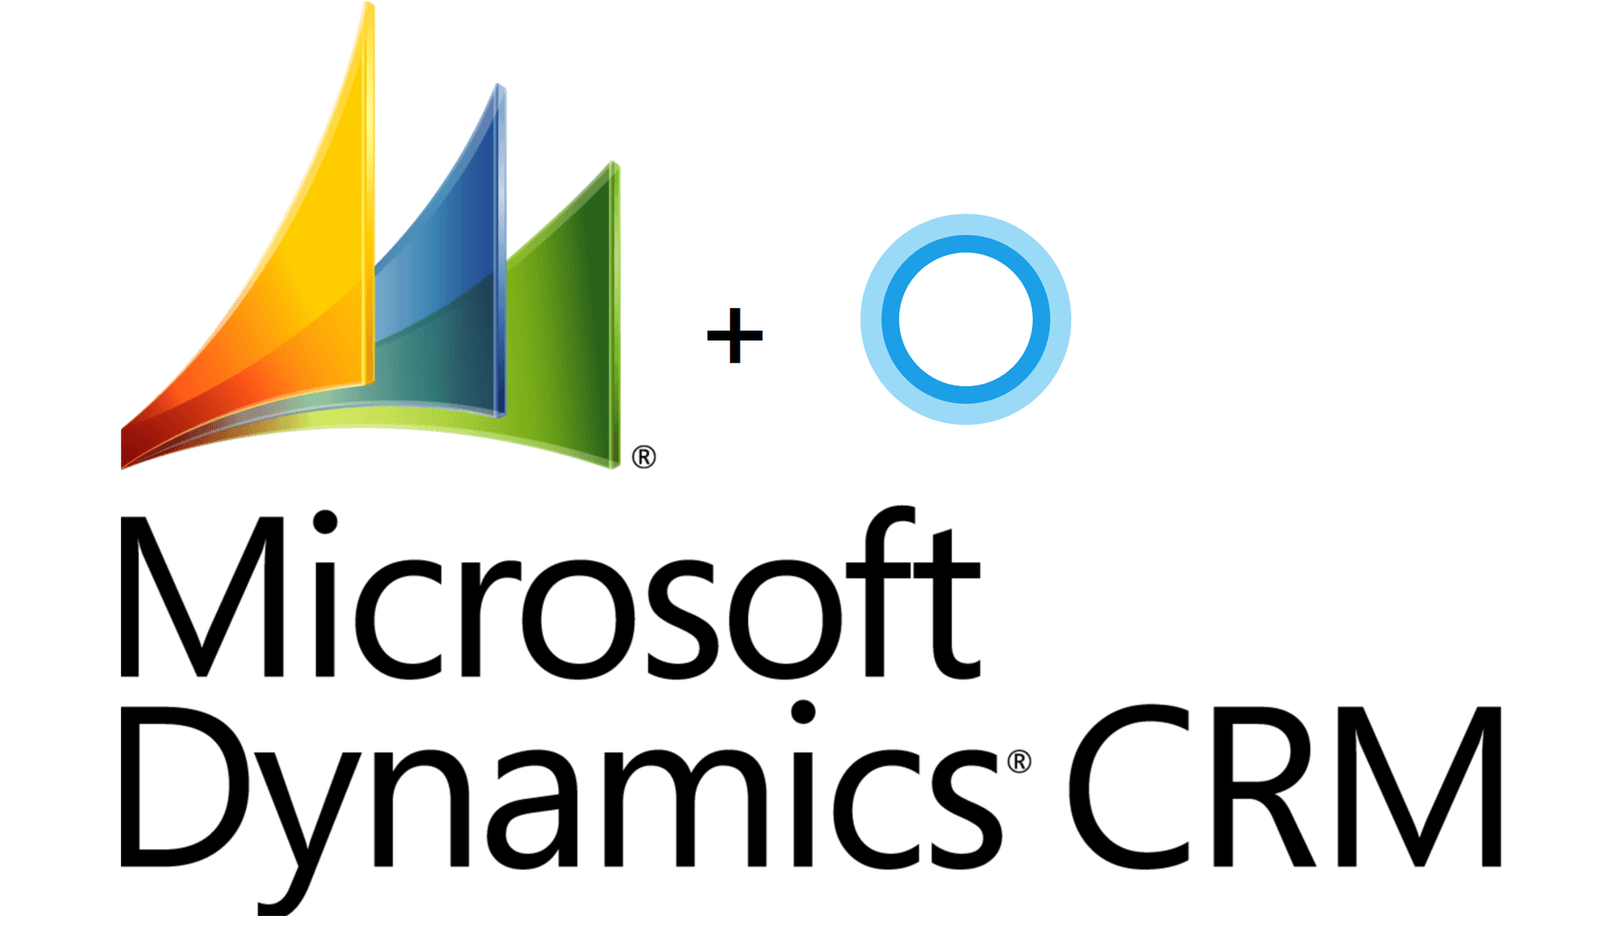 Microsoft Dynamics CRM Logo - Microsoft adds Dynamics CRM support to Cortana through Connected ...